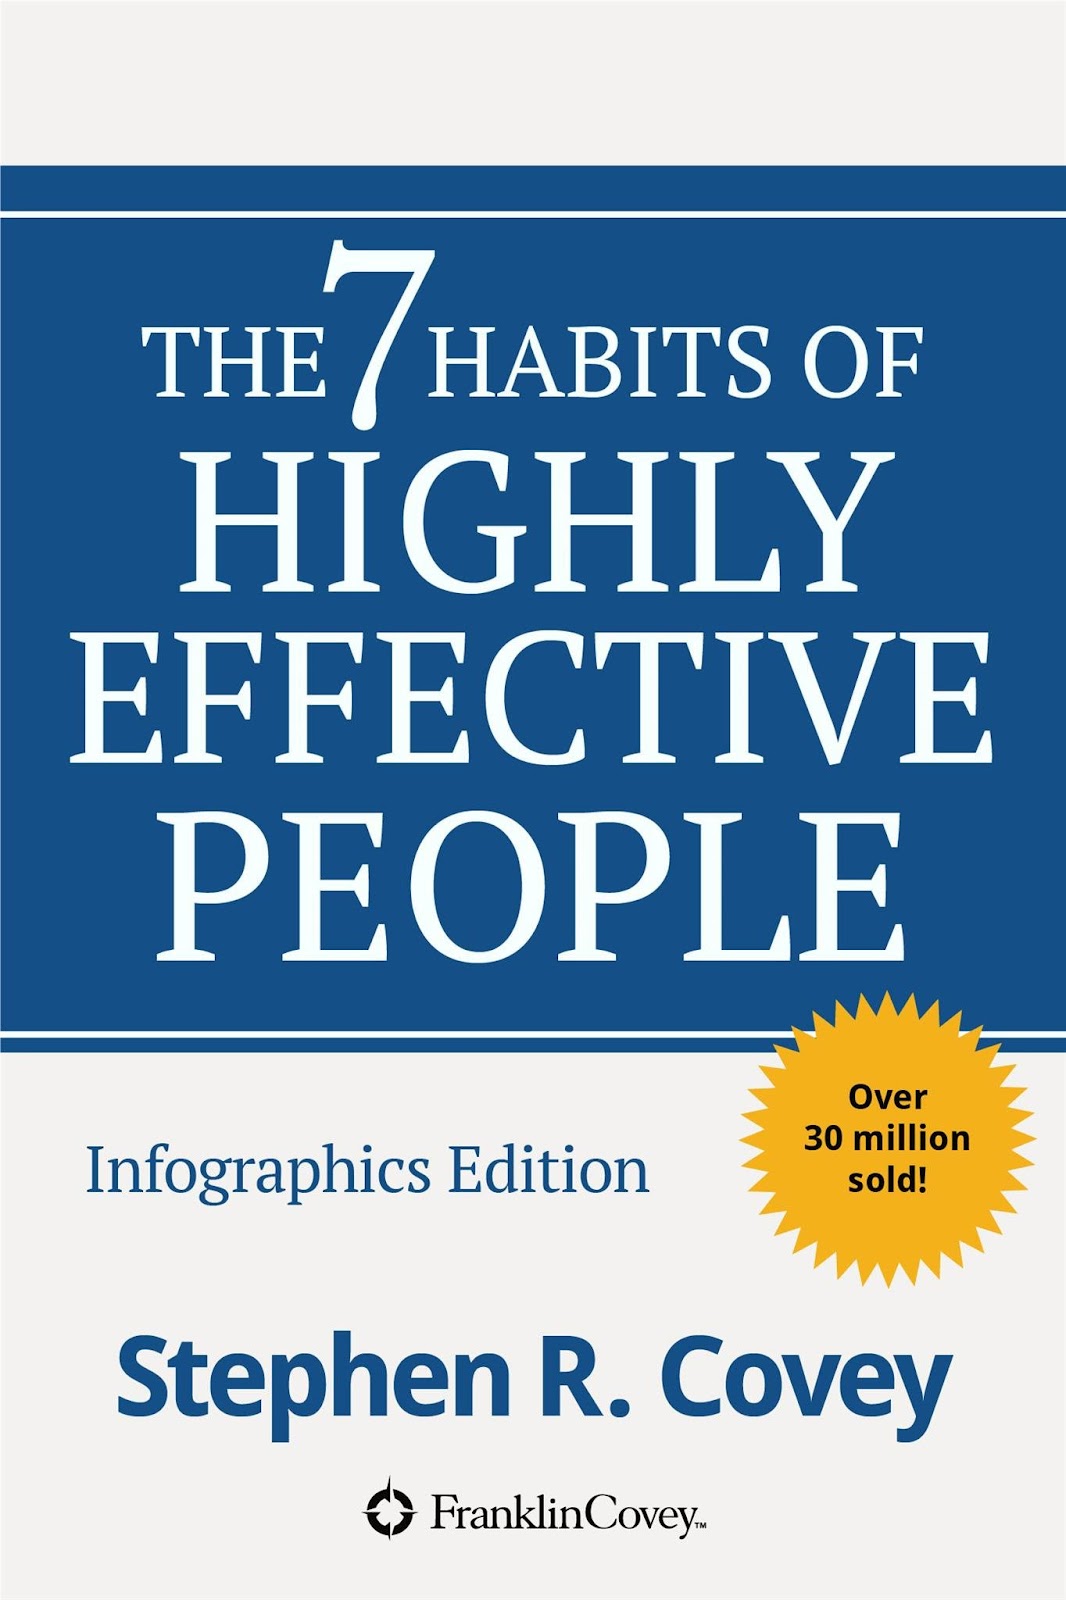 Amazon.com: The 7 Habits of Highly Effective People: Powerful ...